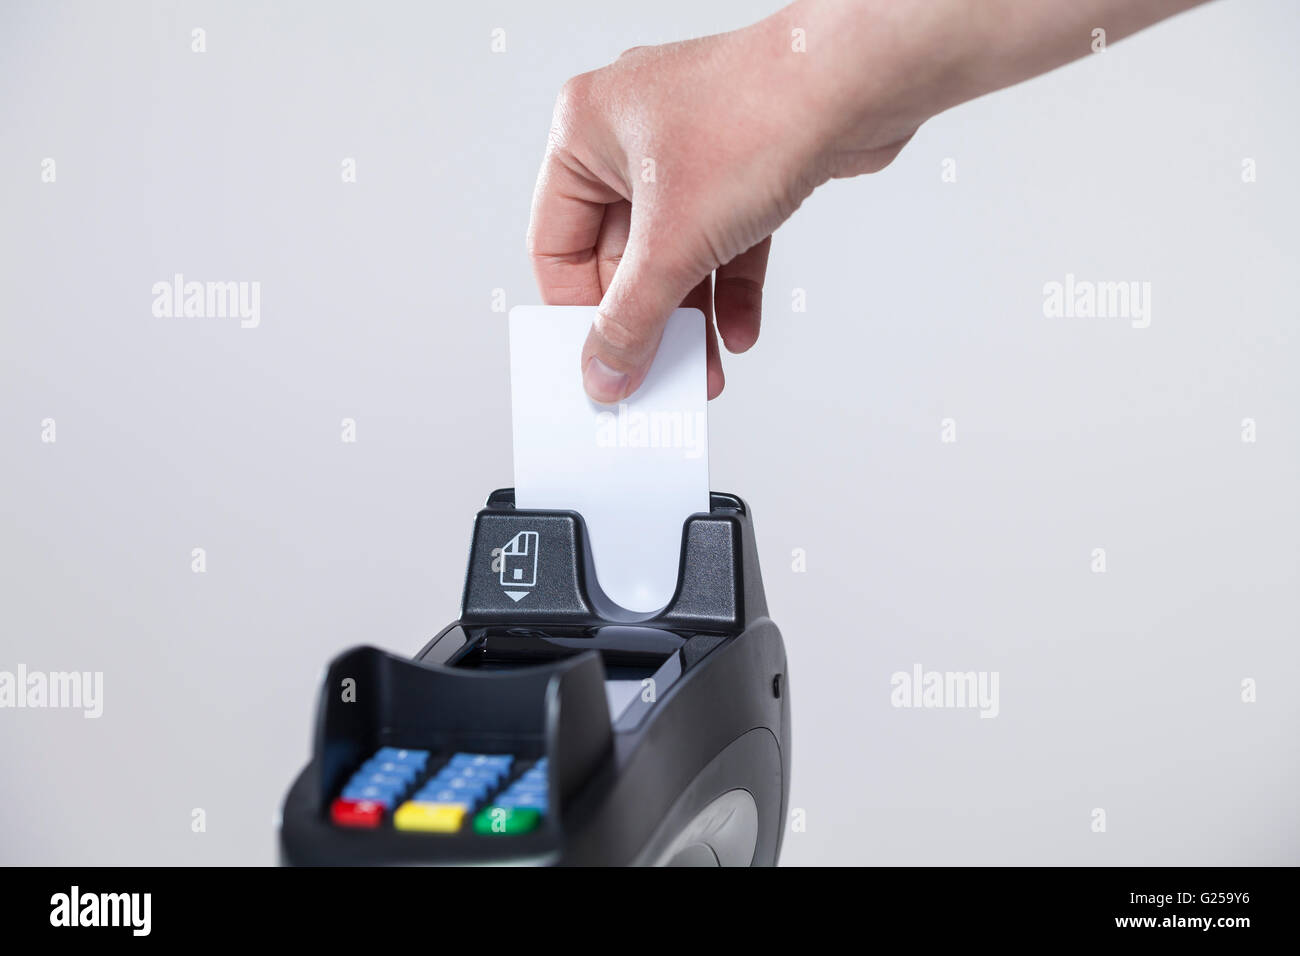 Pay with card (card reader for payment) Stock Photo